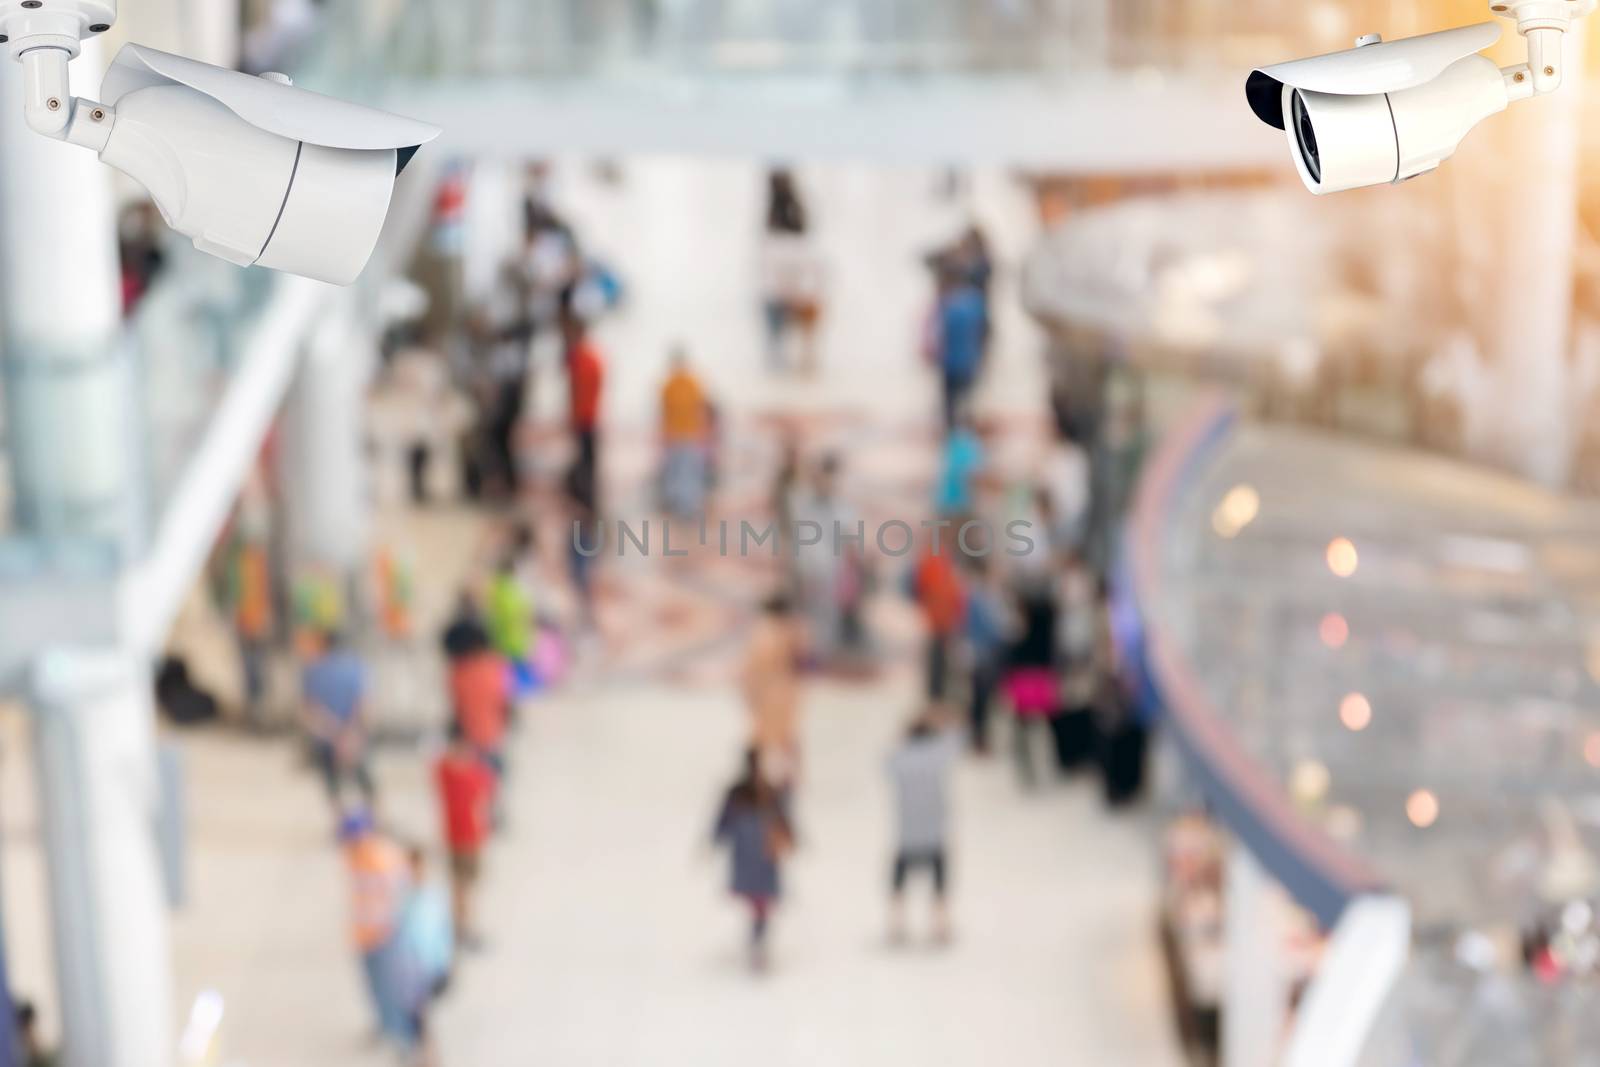 Security cameras (CCTV) or surveillance camera inside the airport terminal to the various internal security.